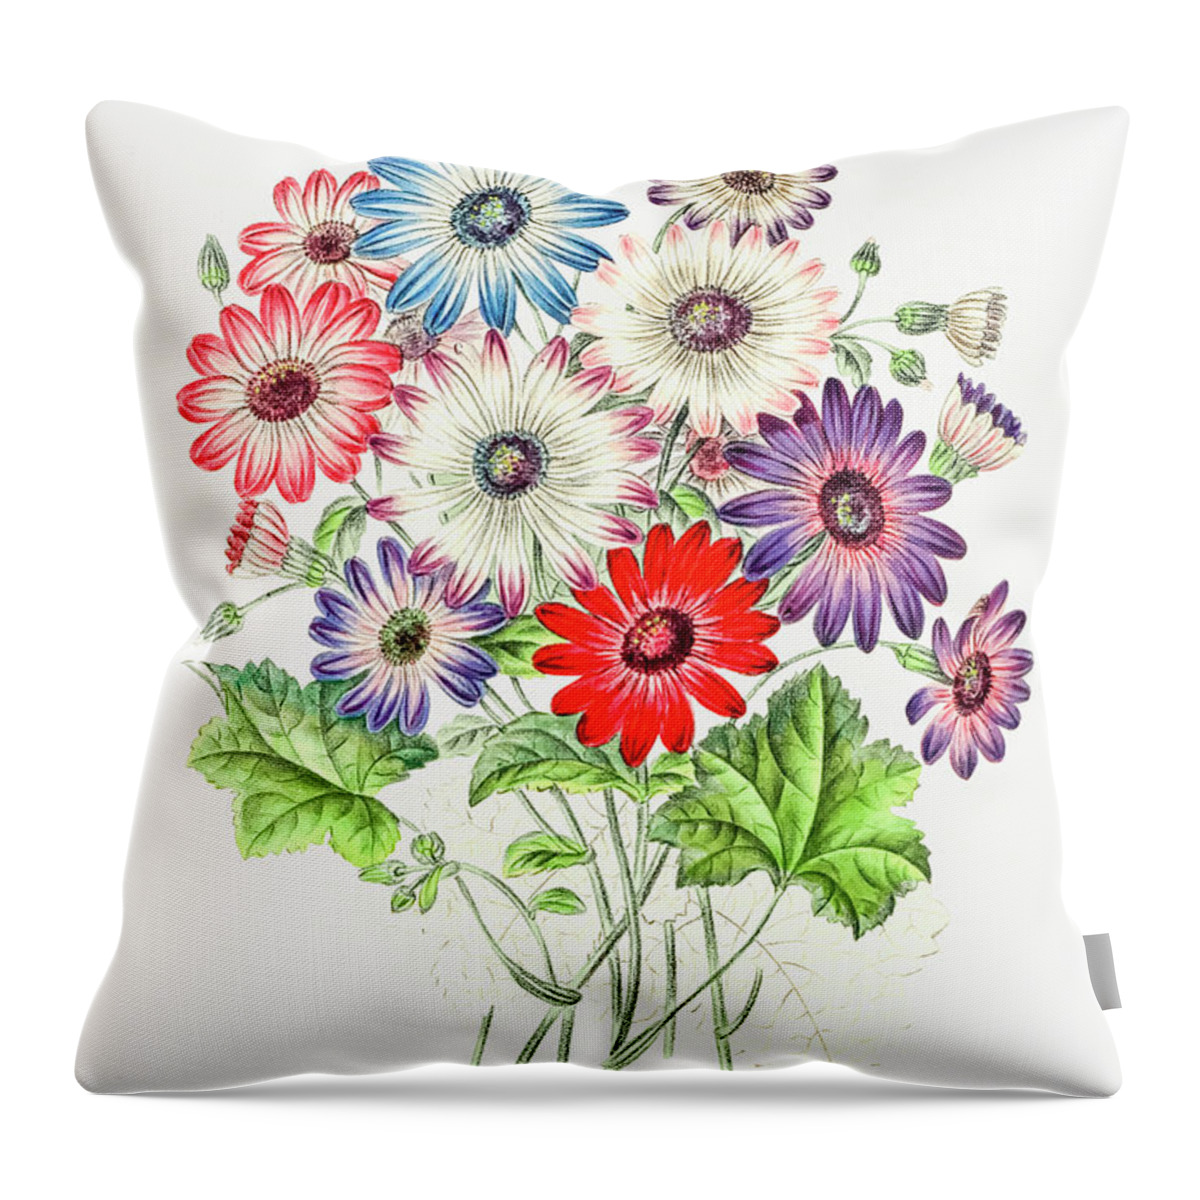 Colorful Chrysanthemums Throw Pillow featuring the painting Colorful Chrysanthemums by Mango Art